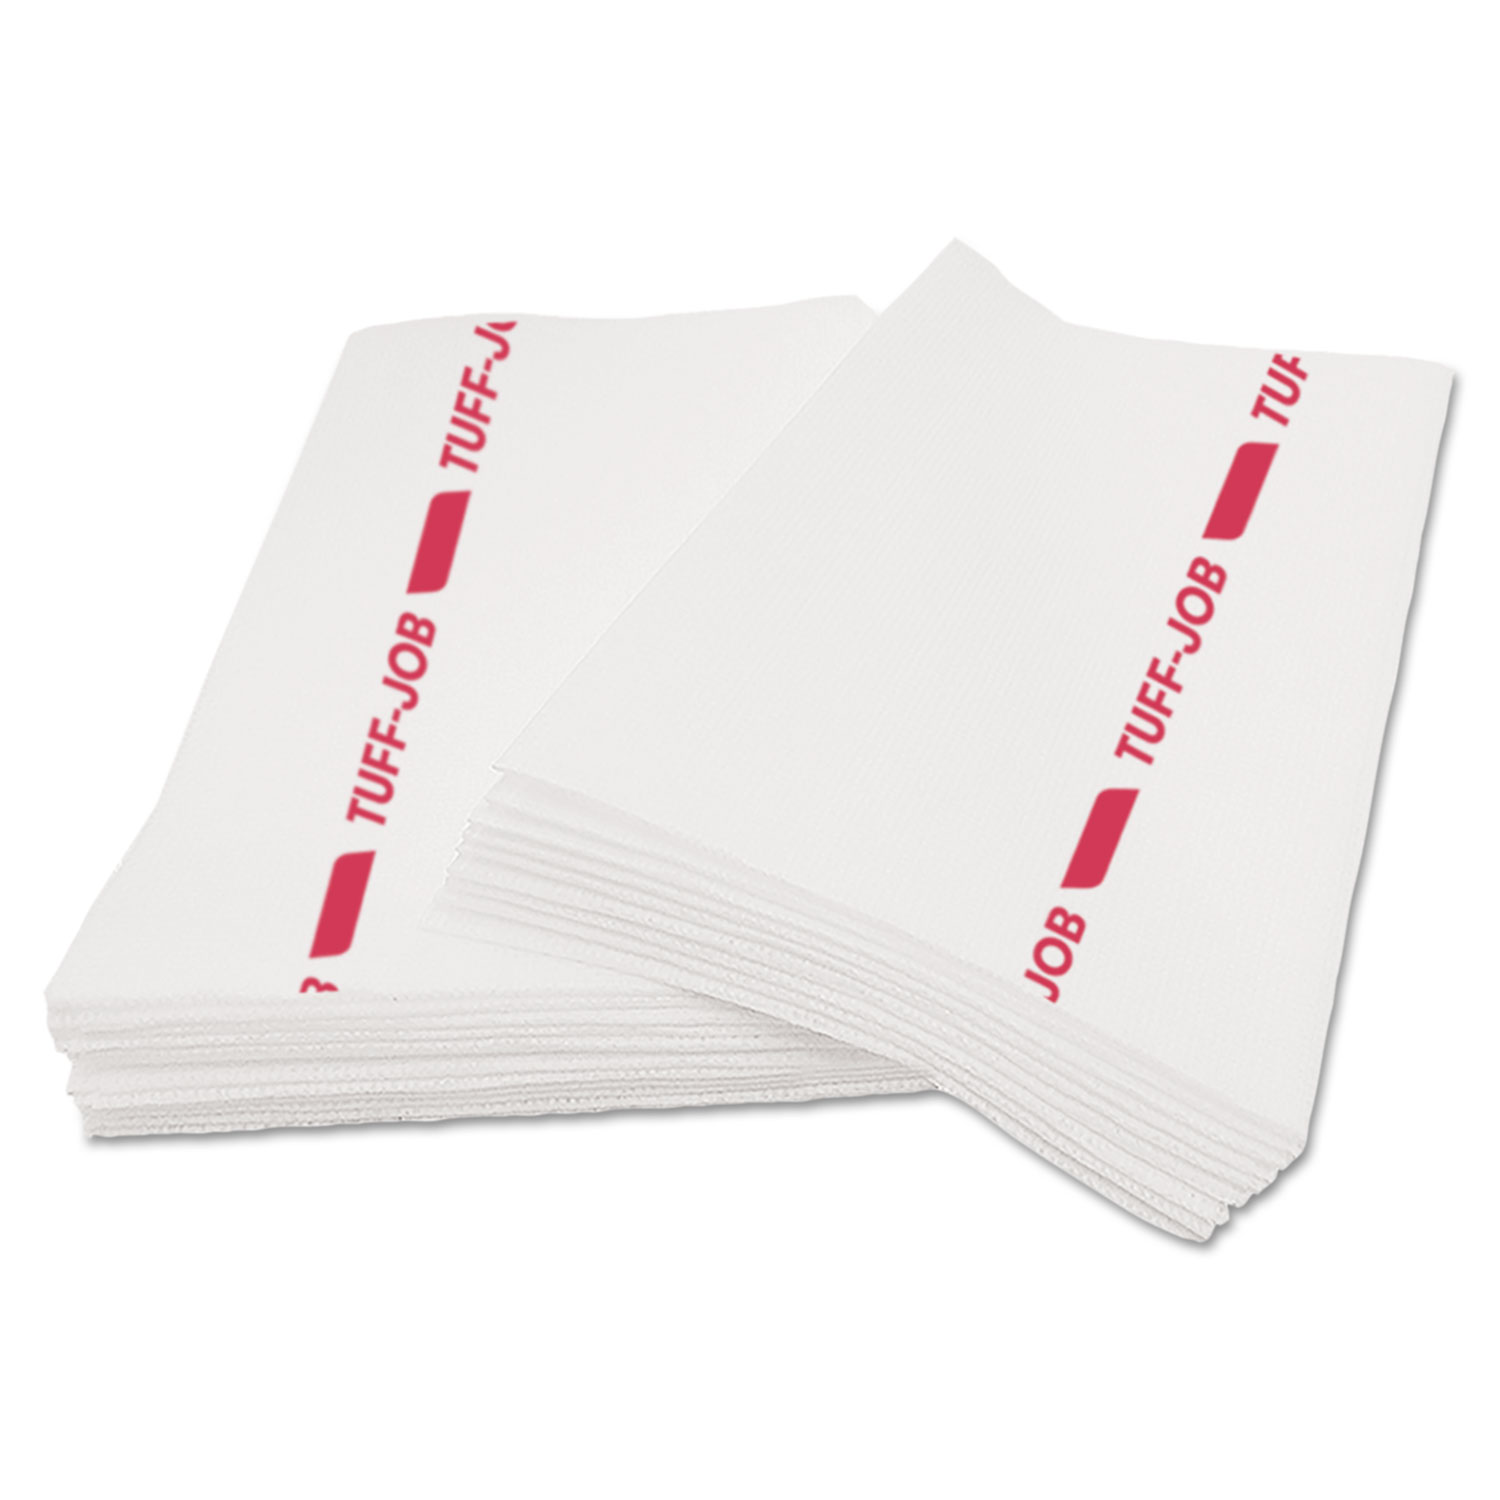  Cascades PRO W921 Tuff-Job S900 Antimicrobial Foodservice Towels, White/Red, 12 x 24, 150/CT (CSDW921) 